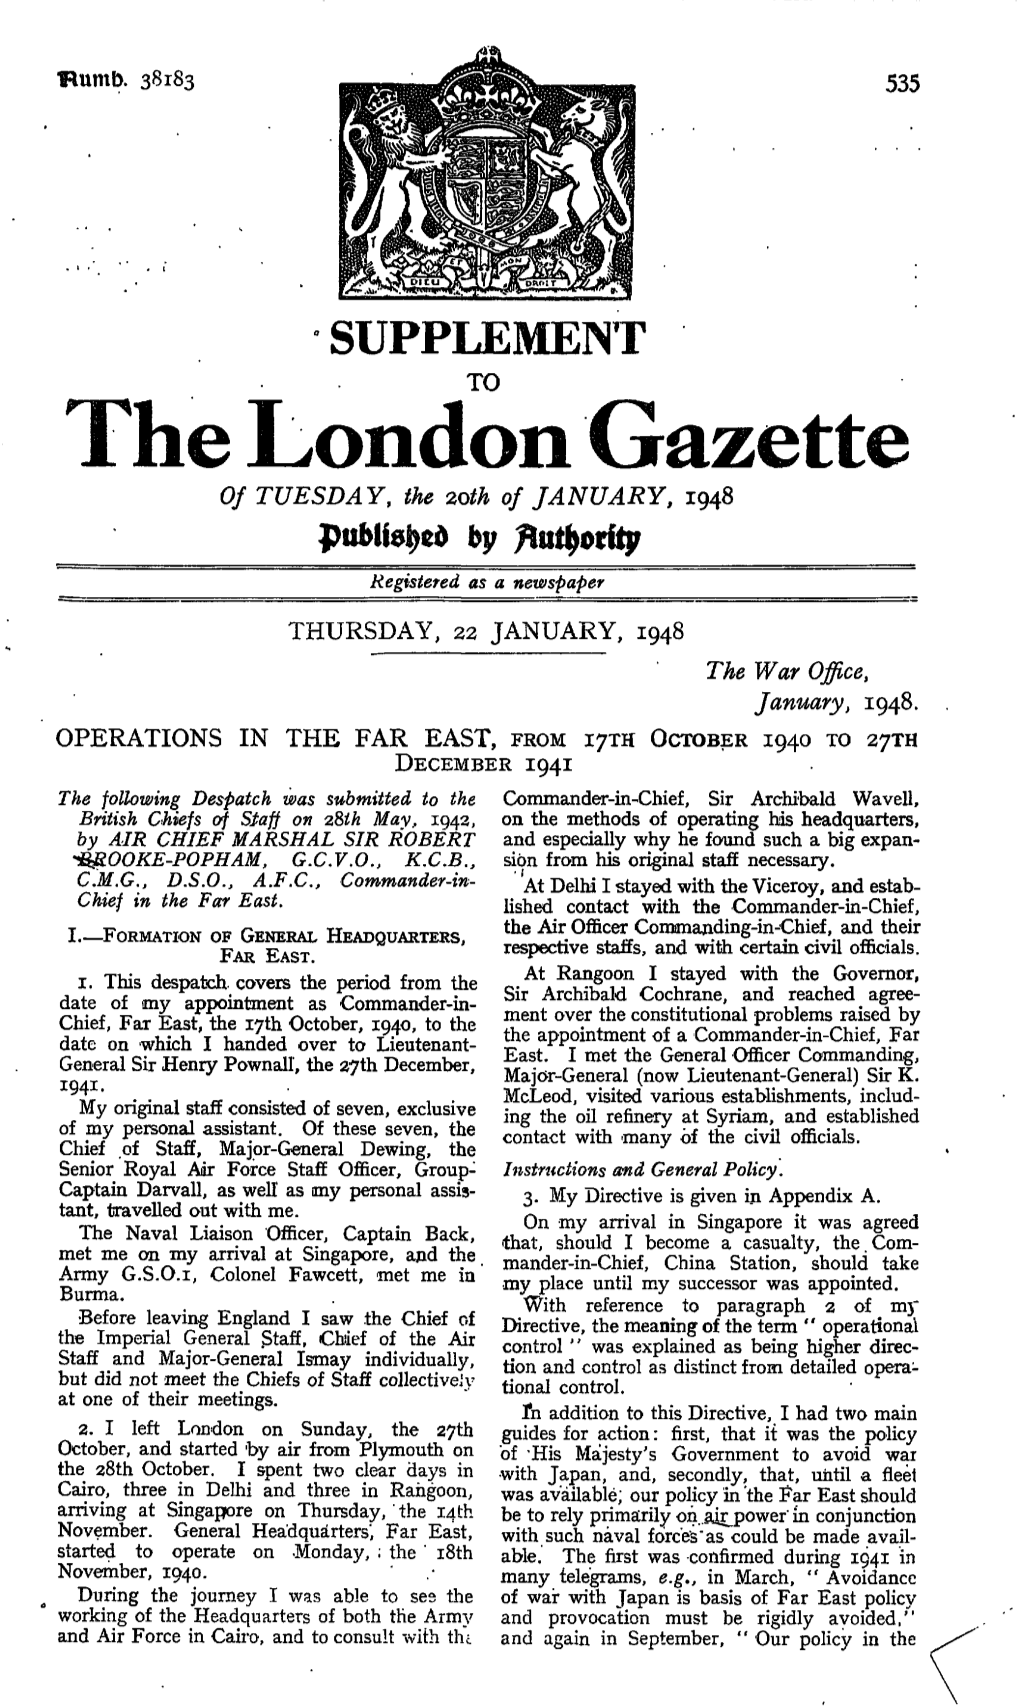 The London Gazette of TUESDAY, the 2Oth of JANUARY, 1948